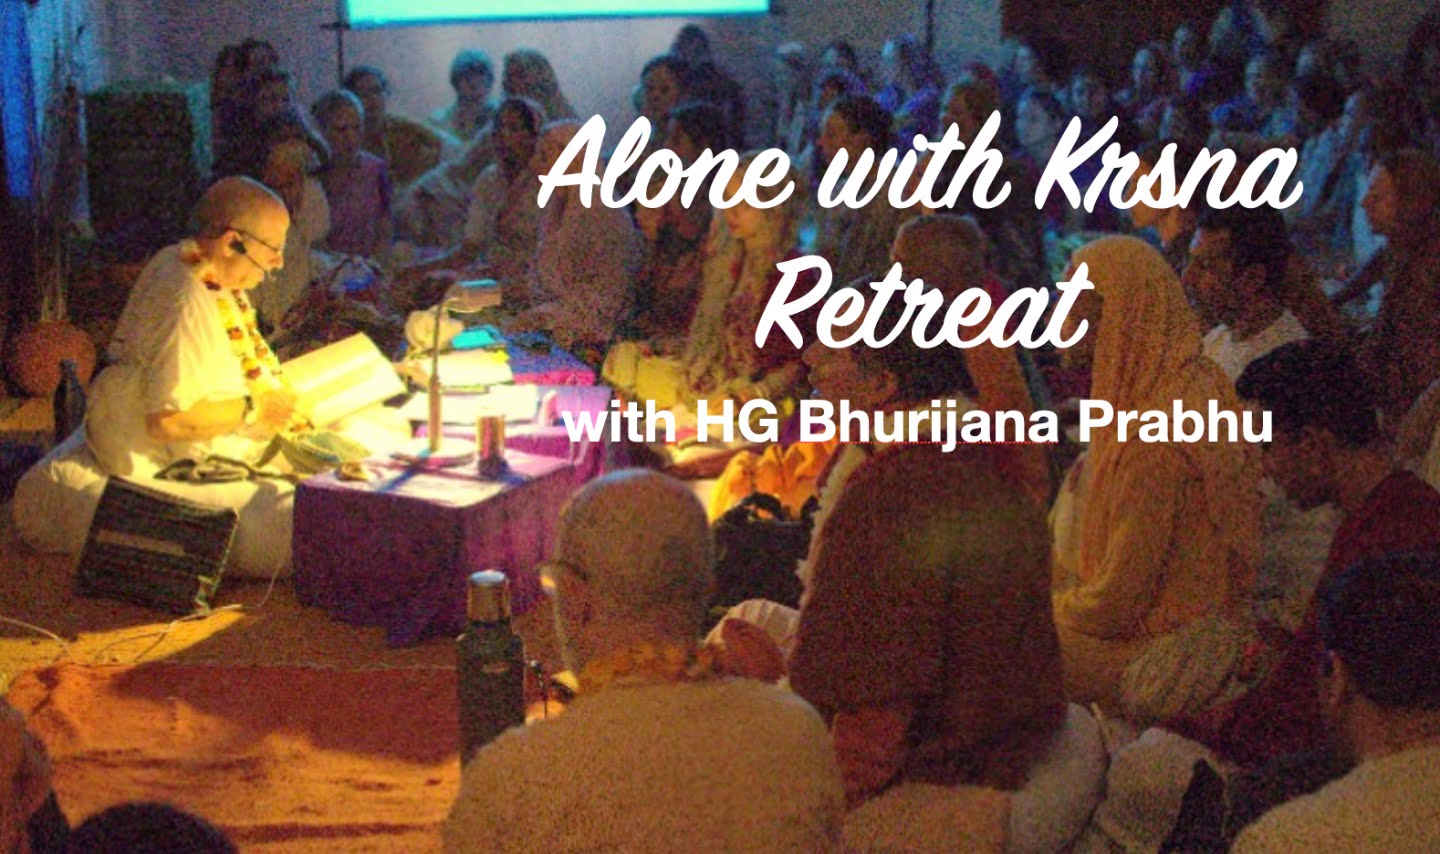 Alone with Krsna Retreat Organized within the Month of Kartika